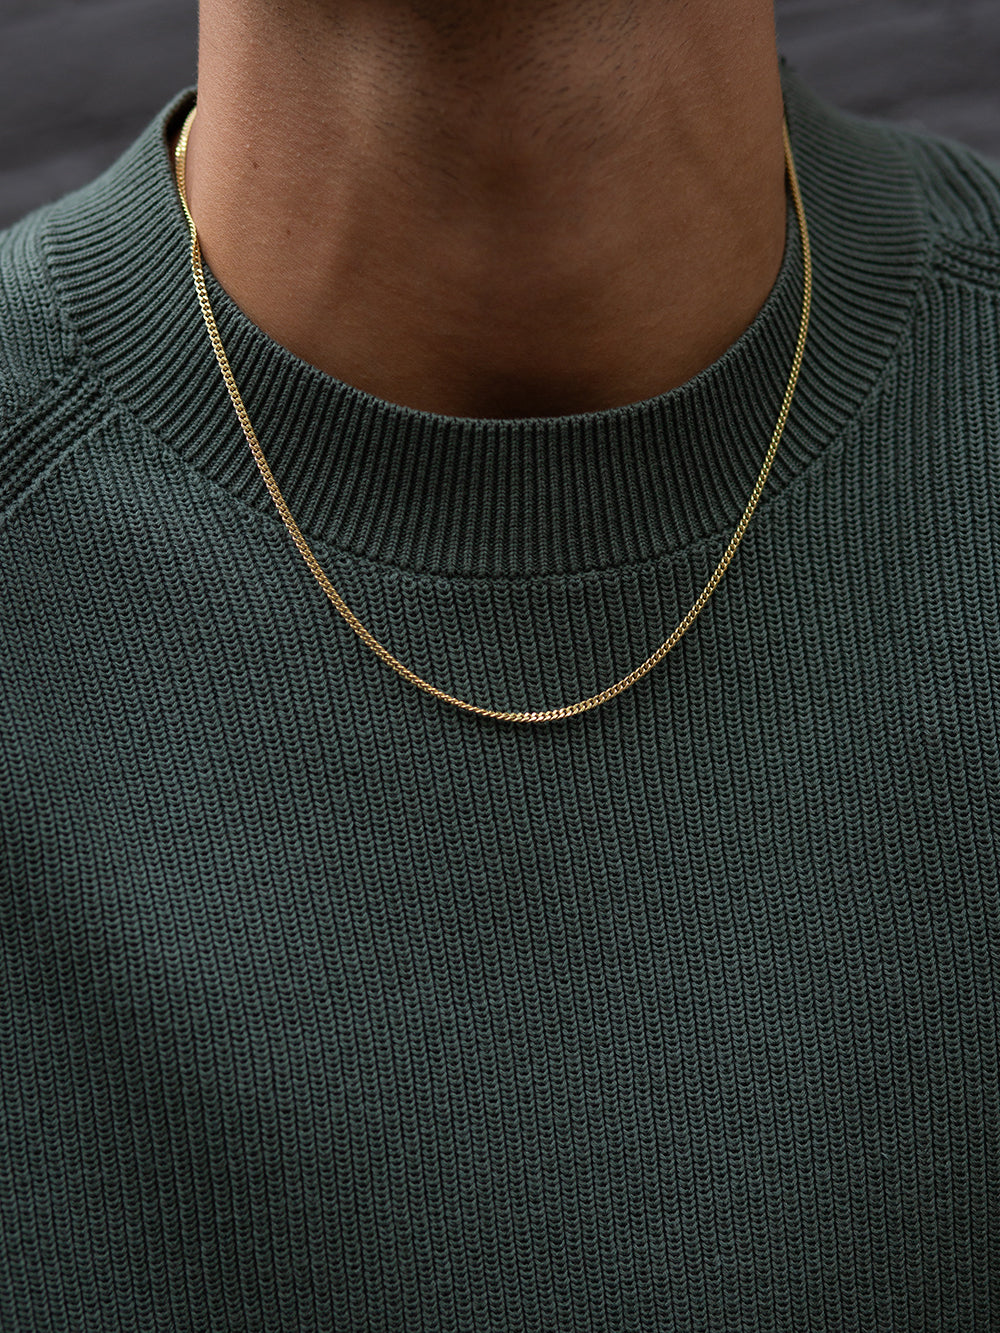 0110 | 14K Gold Plated